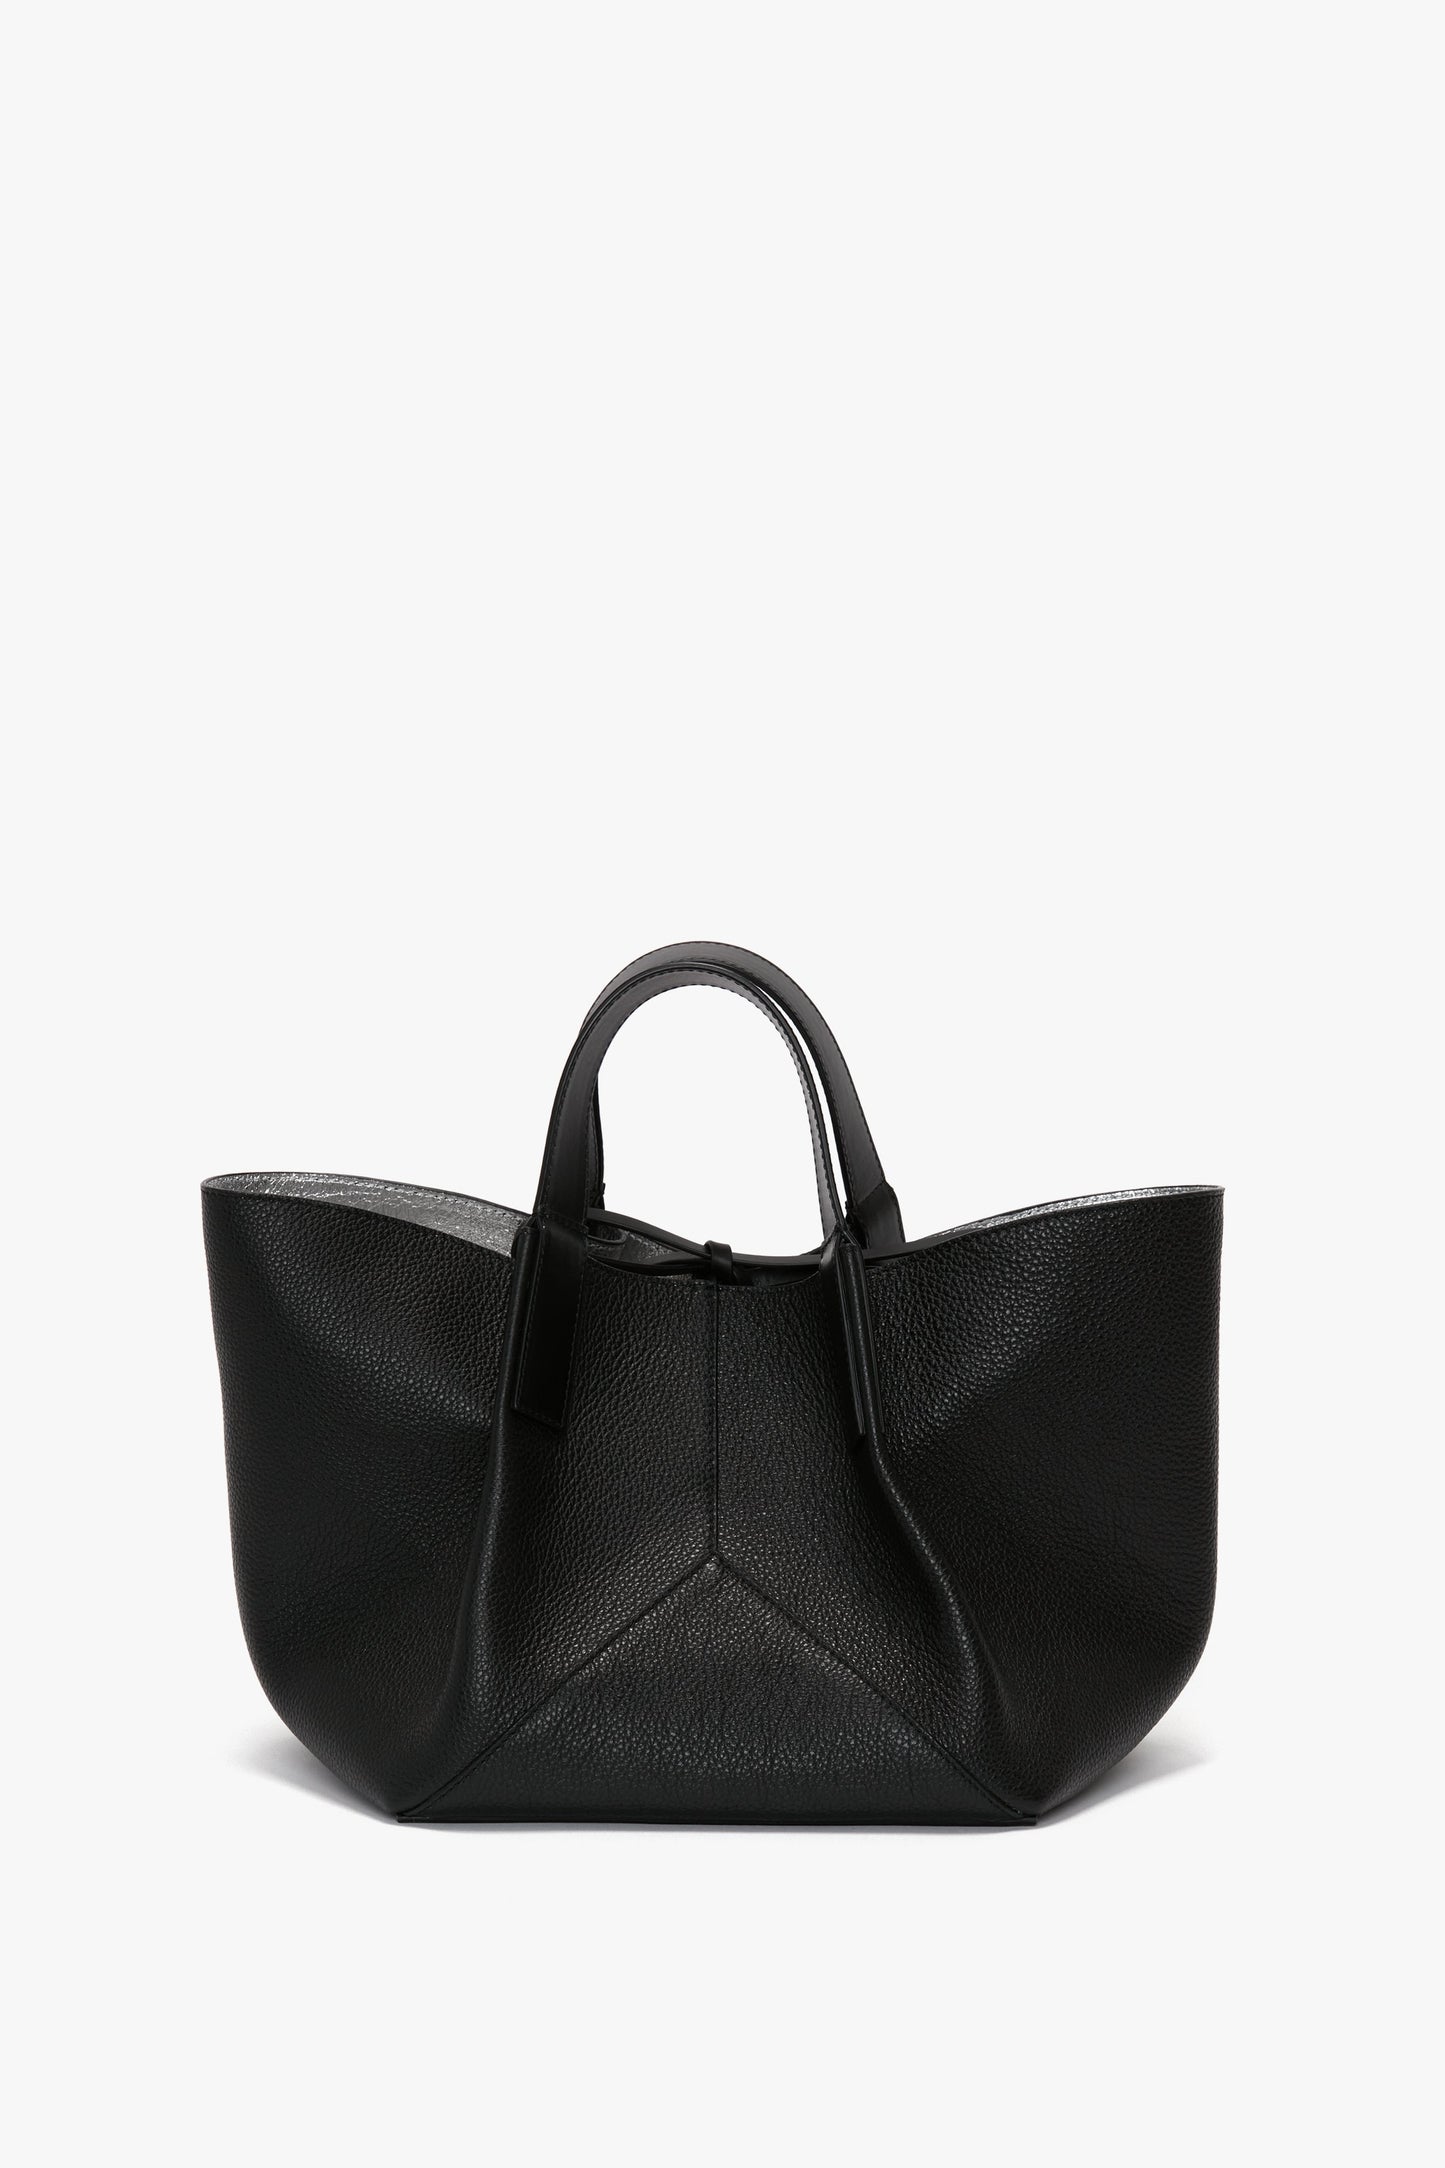 W11 Mini Tote Bag In Black Leather by Victoria Beckham, crafted from grainy calf leather, featuring two short handles and a structured, triangular shape that exudes luxurious sophistication.